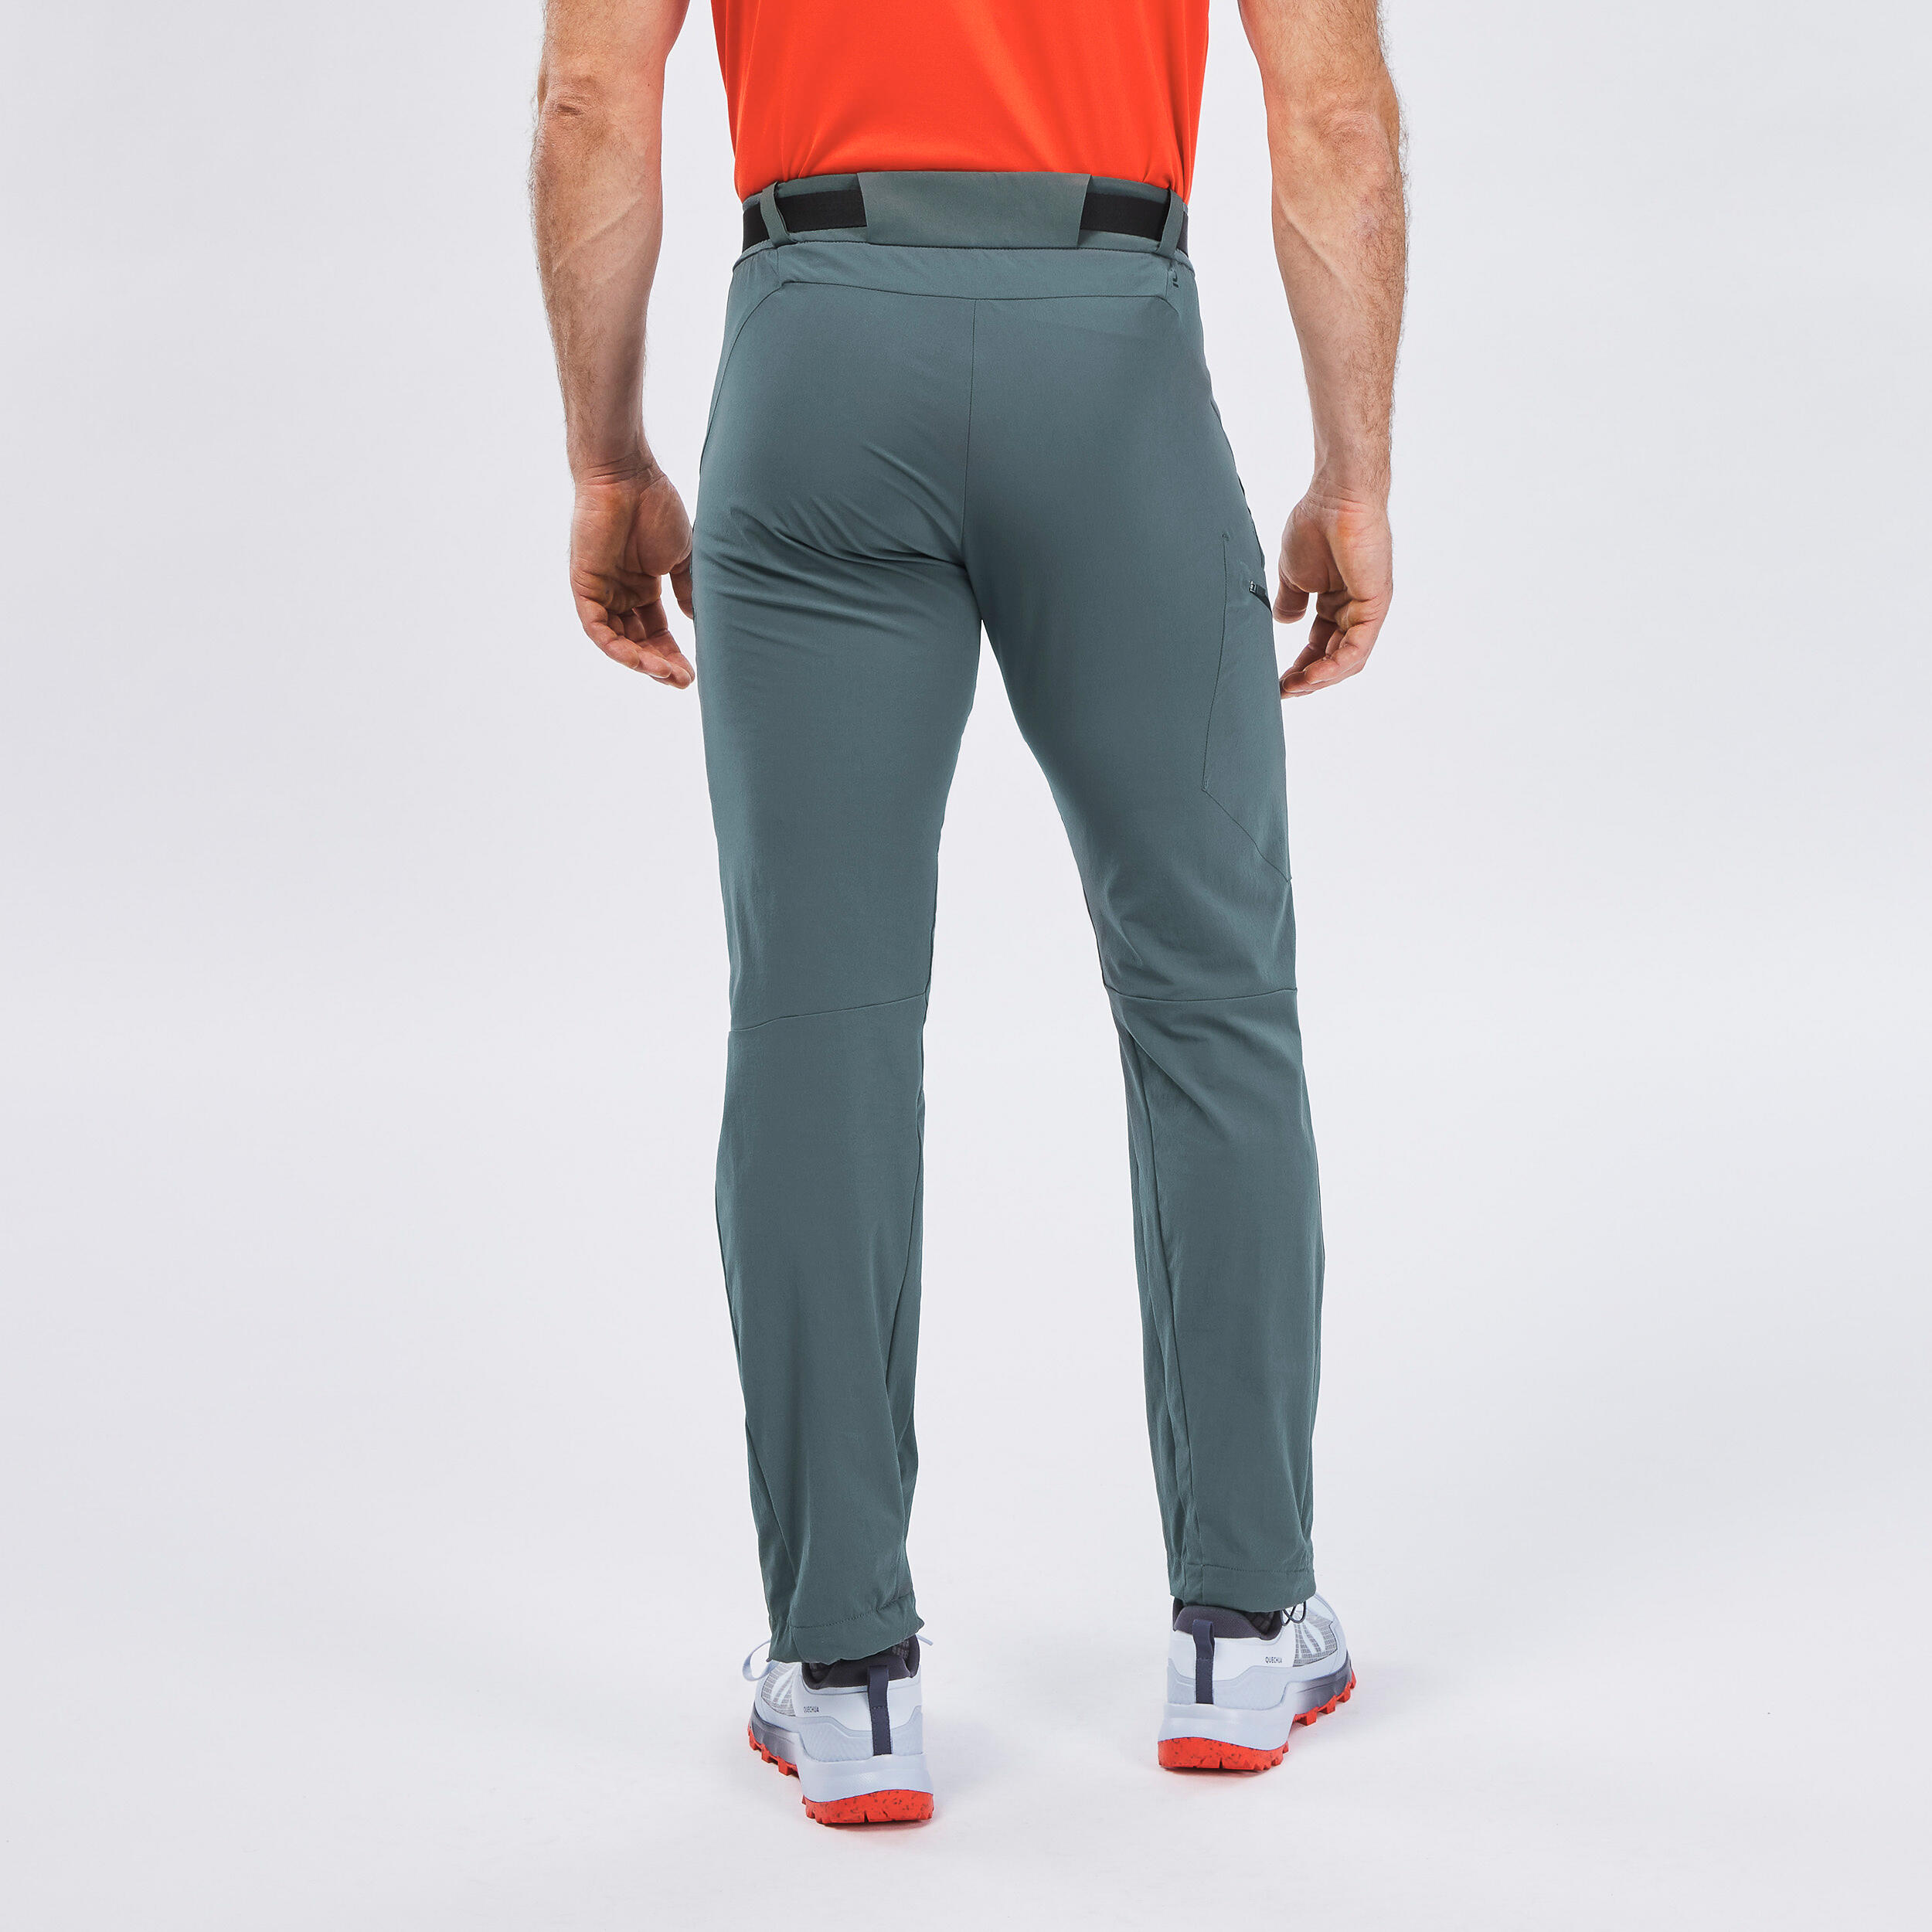 Quechua Trousers - Buy Quechua Trousers online in India